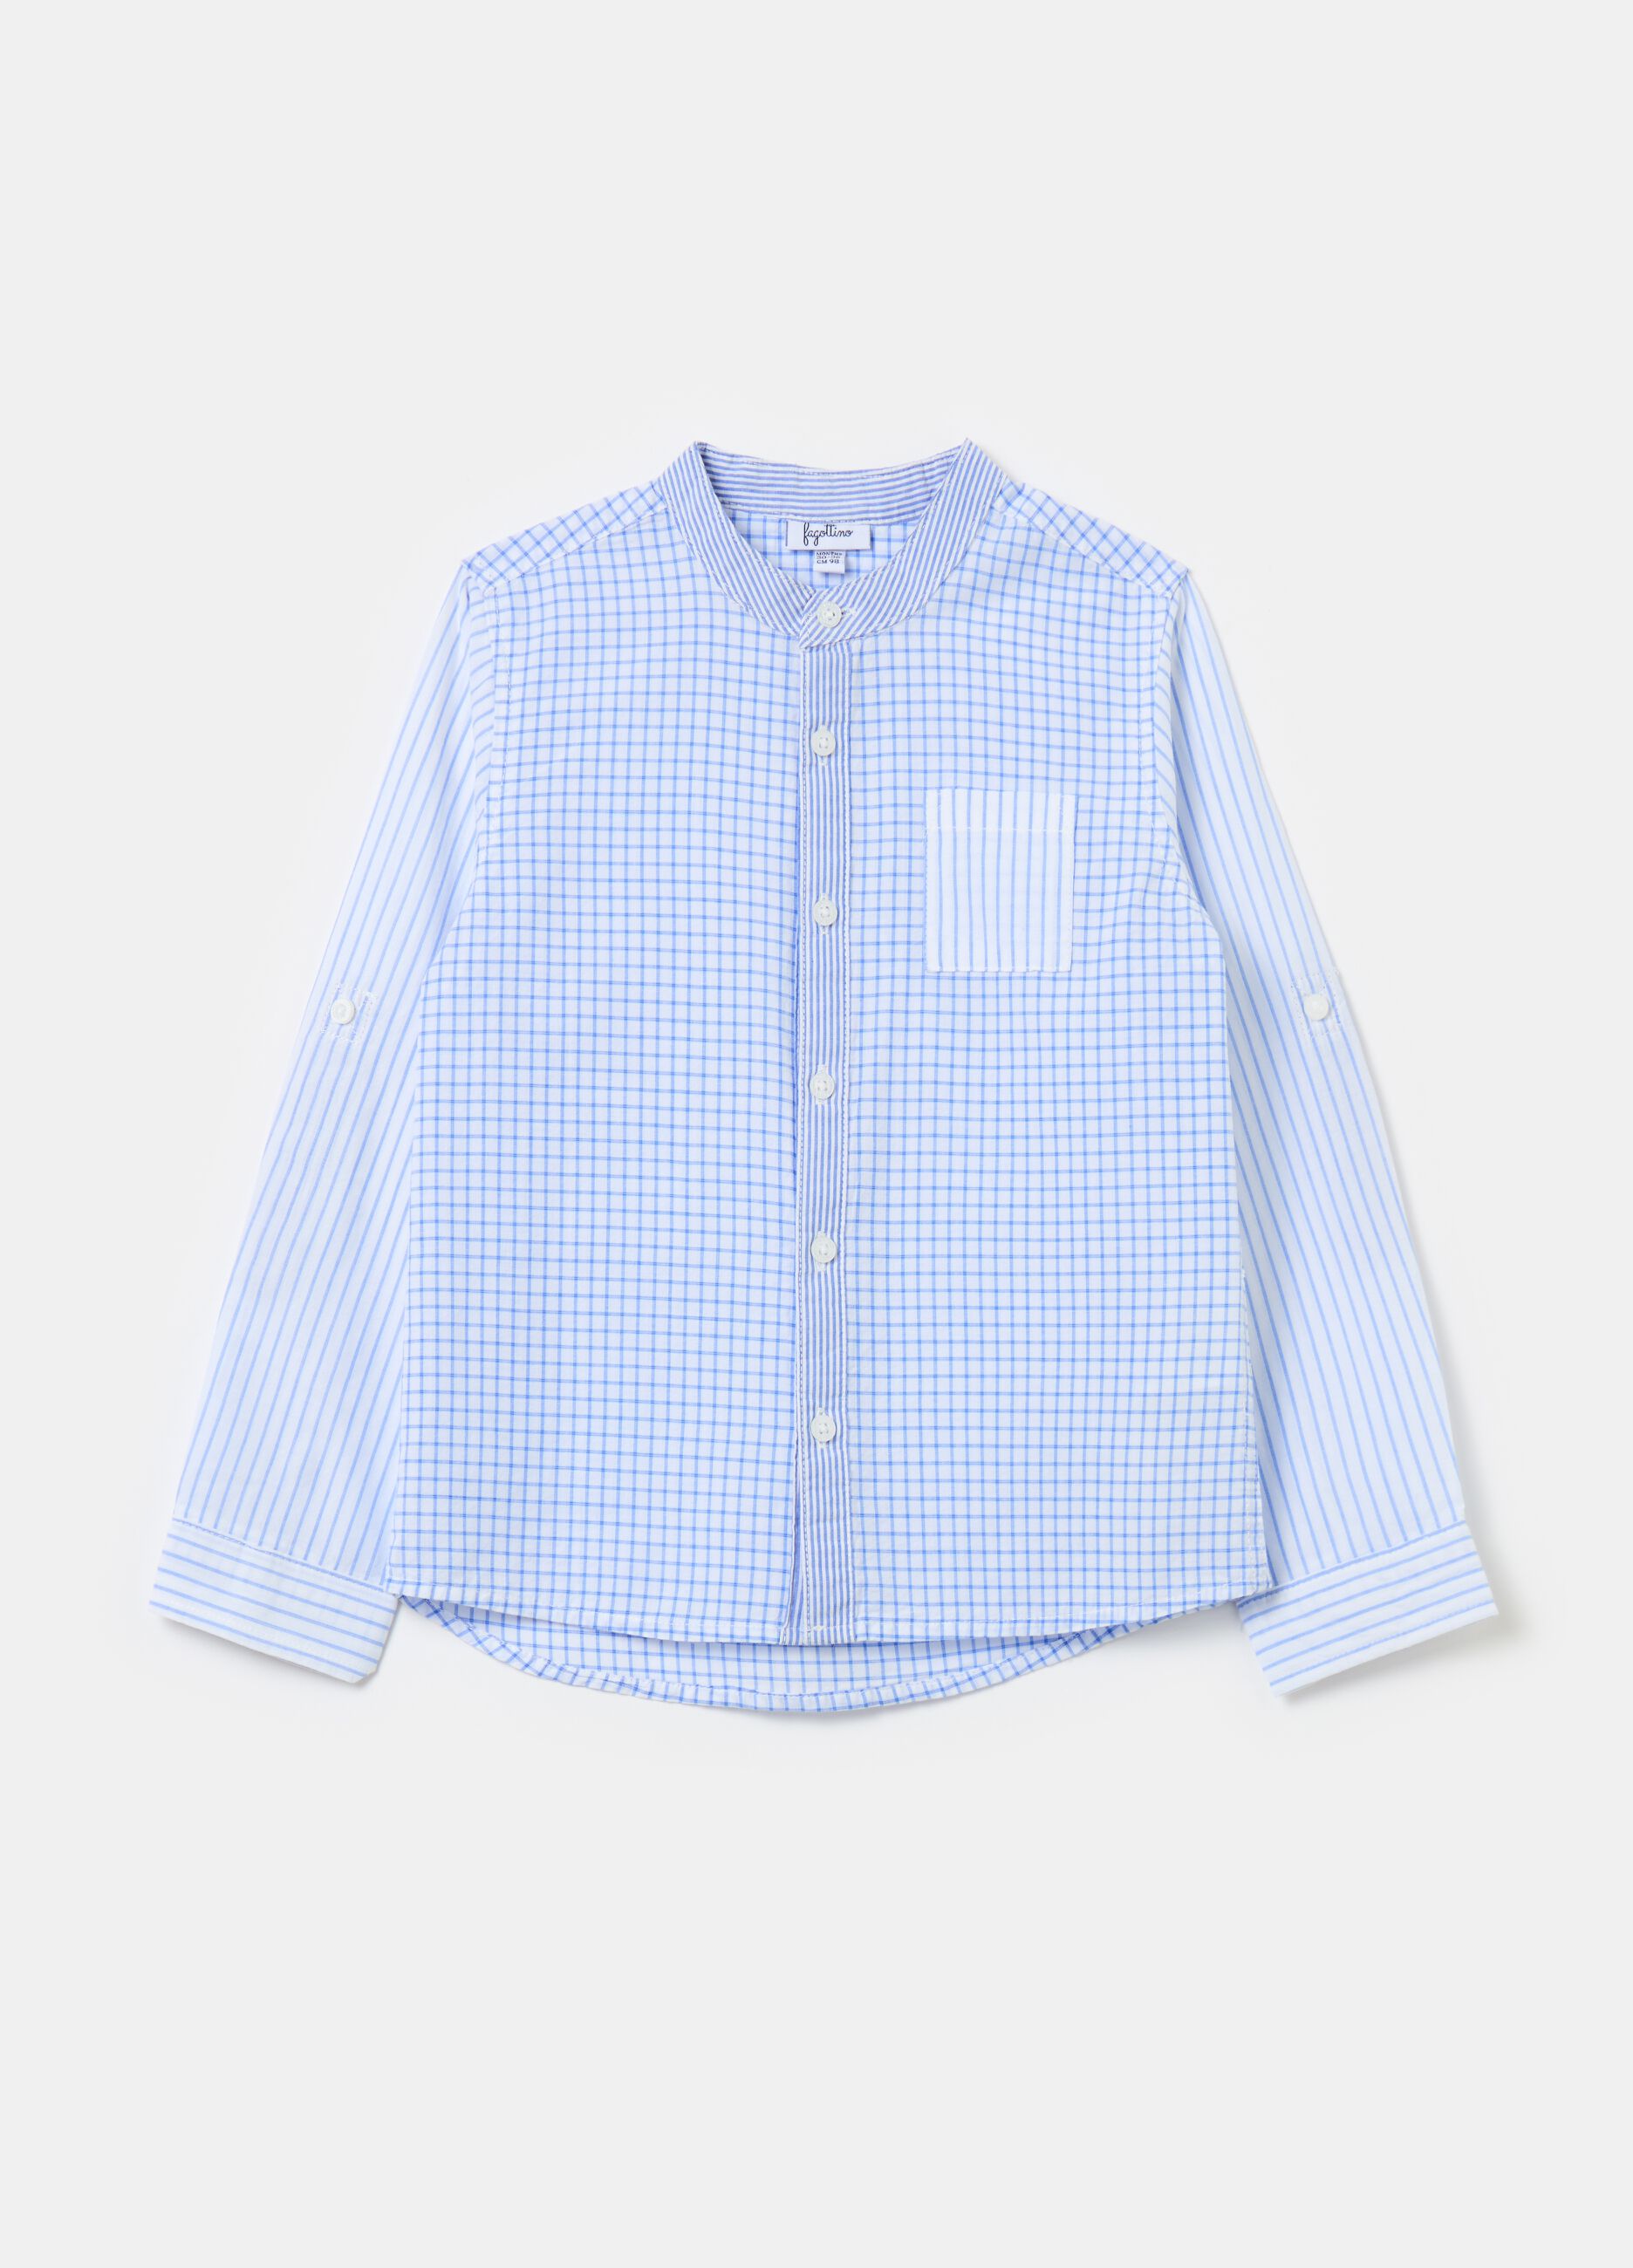 Check and striped shirt in cotton